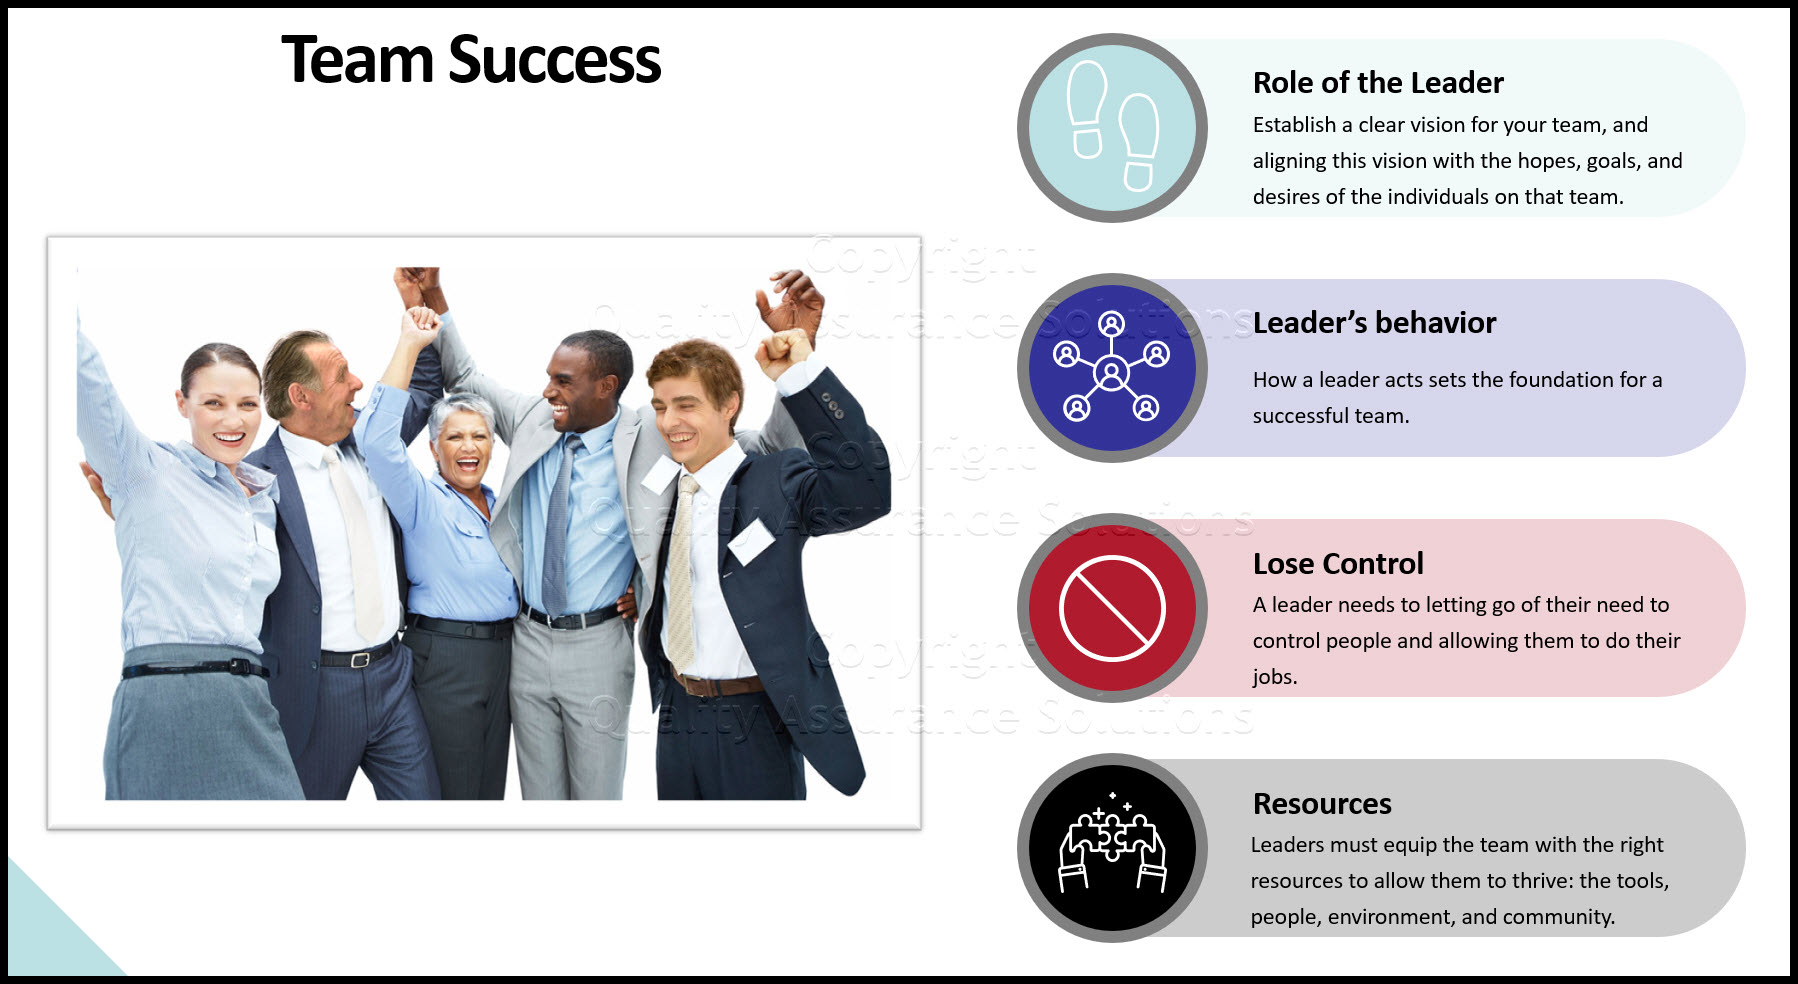 Building a successful team is about instilling servant leadership at the core of your organization.